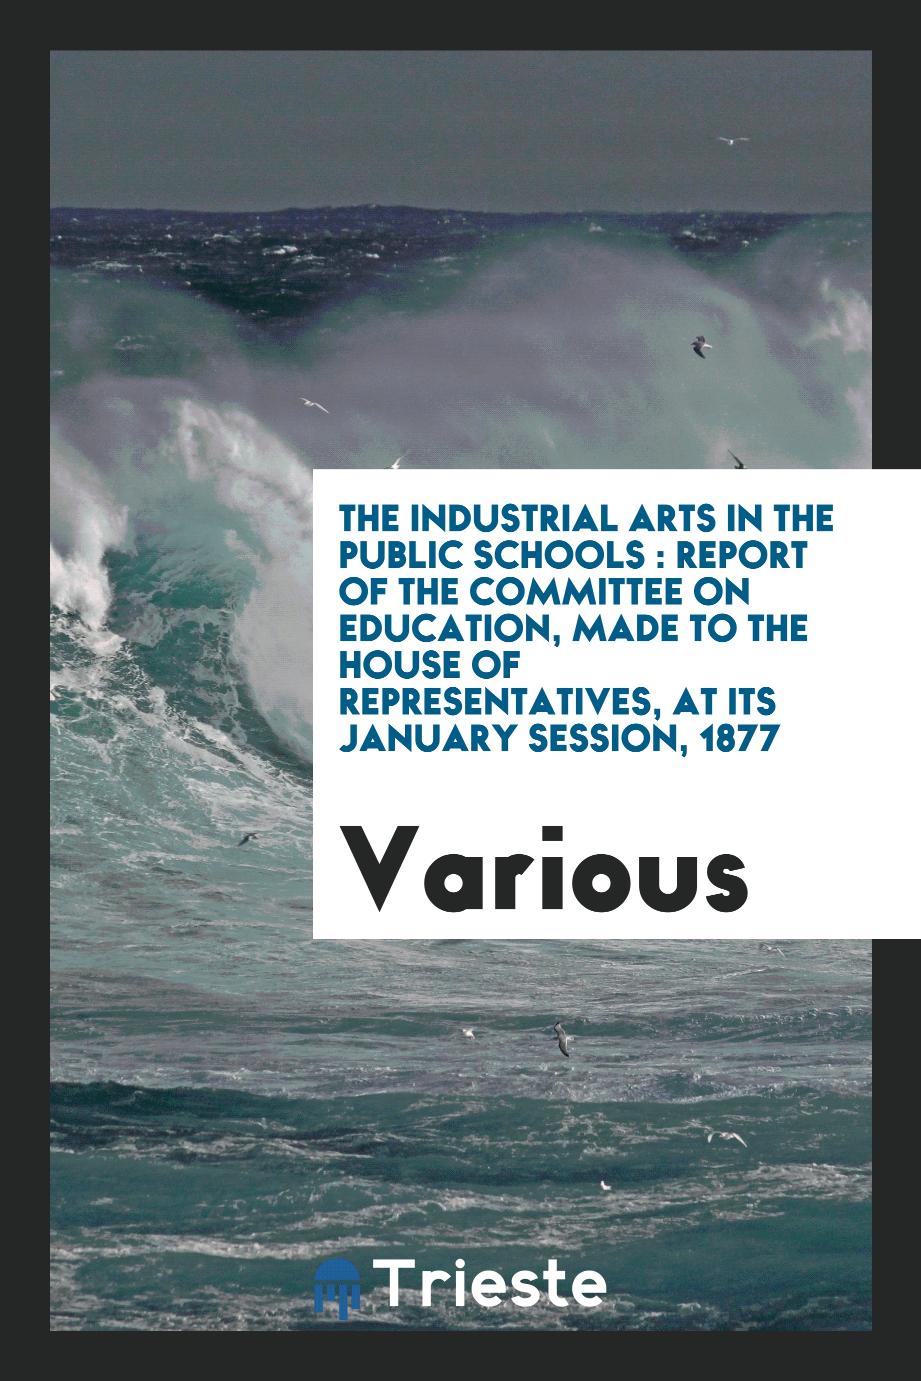 The industrial arts in the public schools : report of the committee on education, made to the House of Representatives, at its January session, 1877